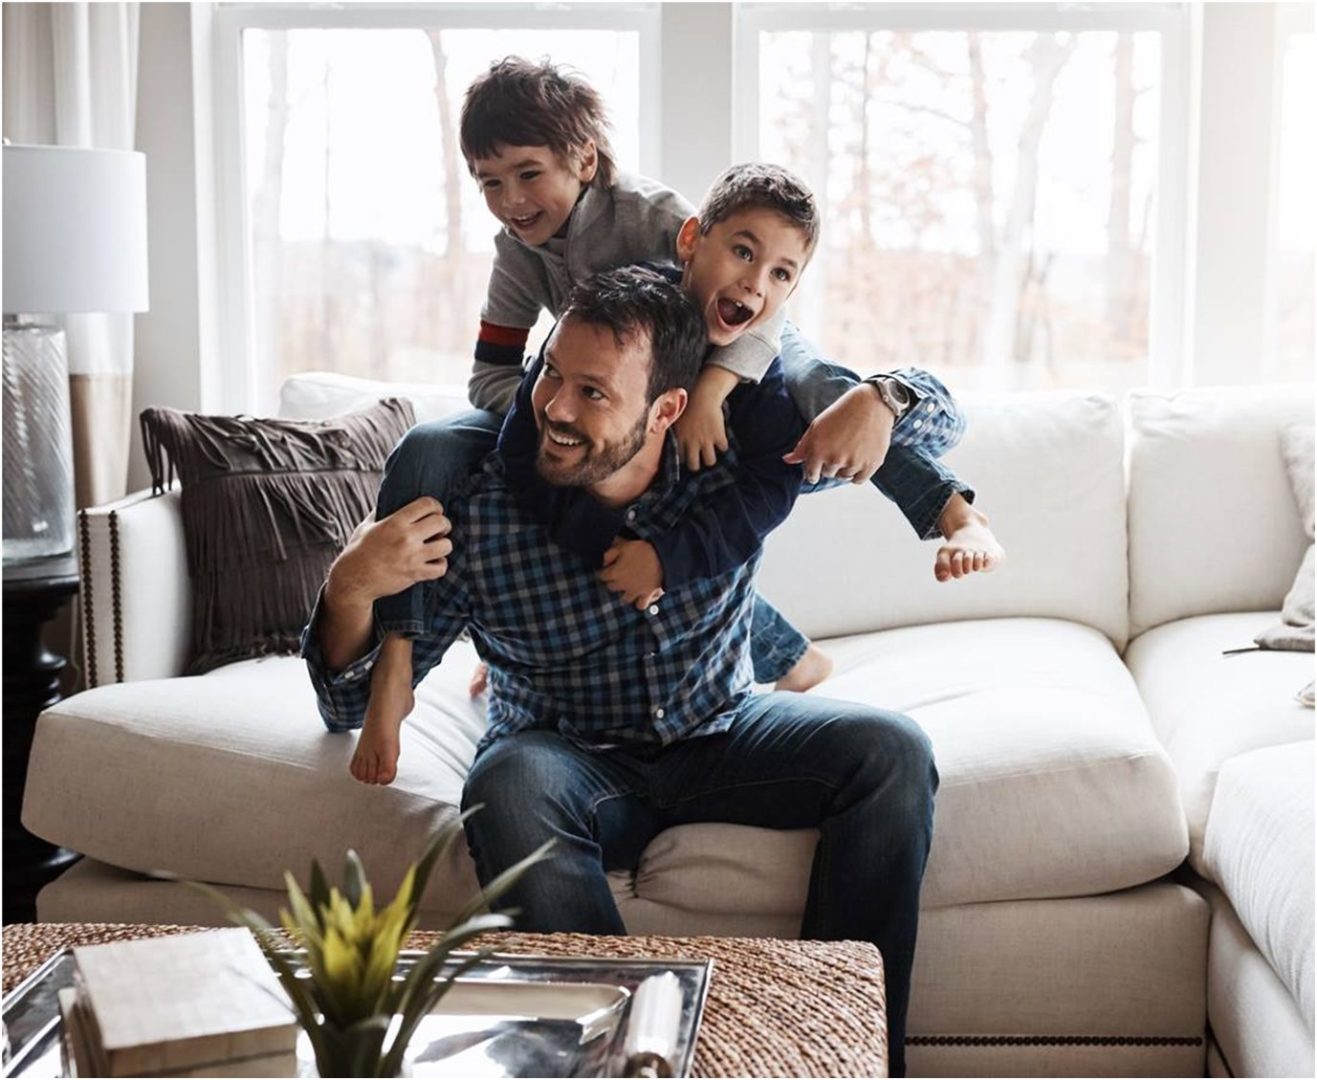 An image of a and and two boys on a sofa having fun